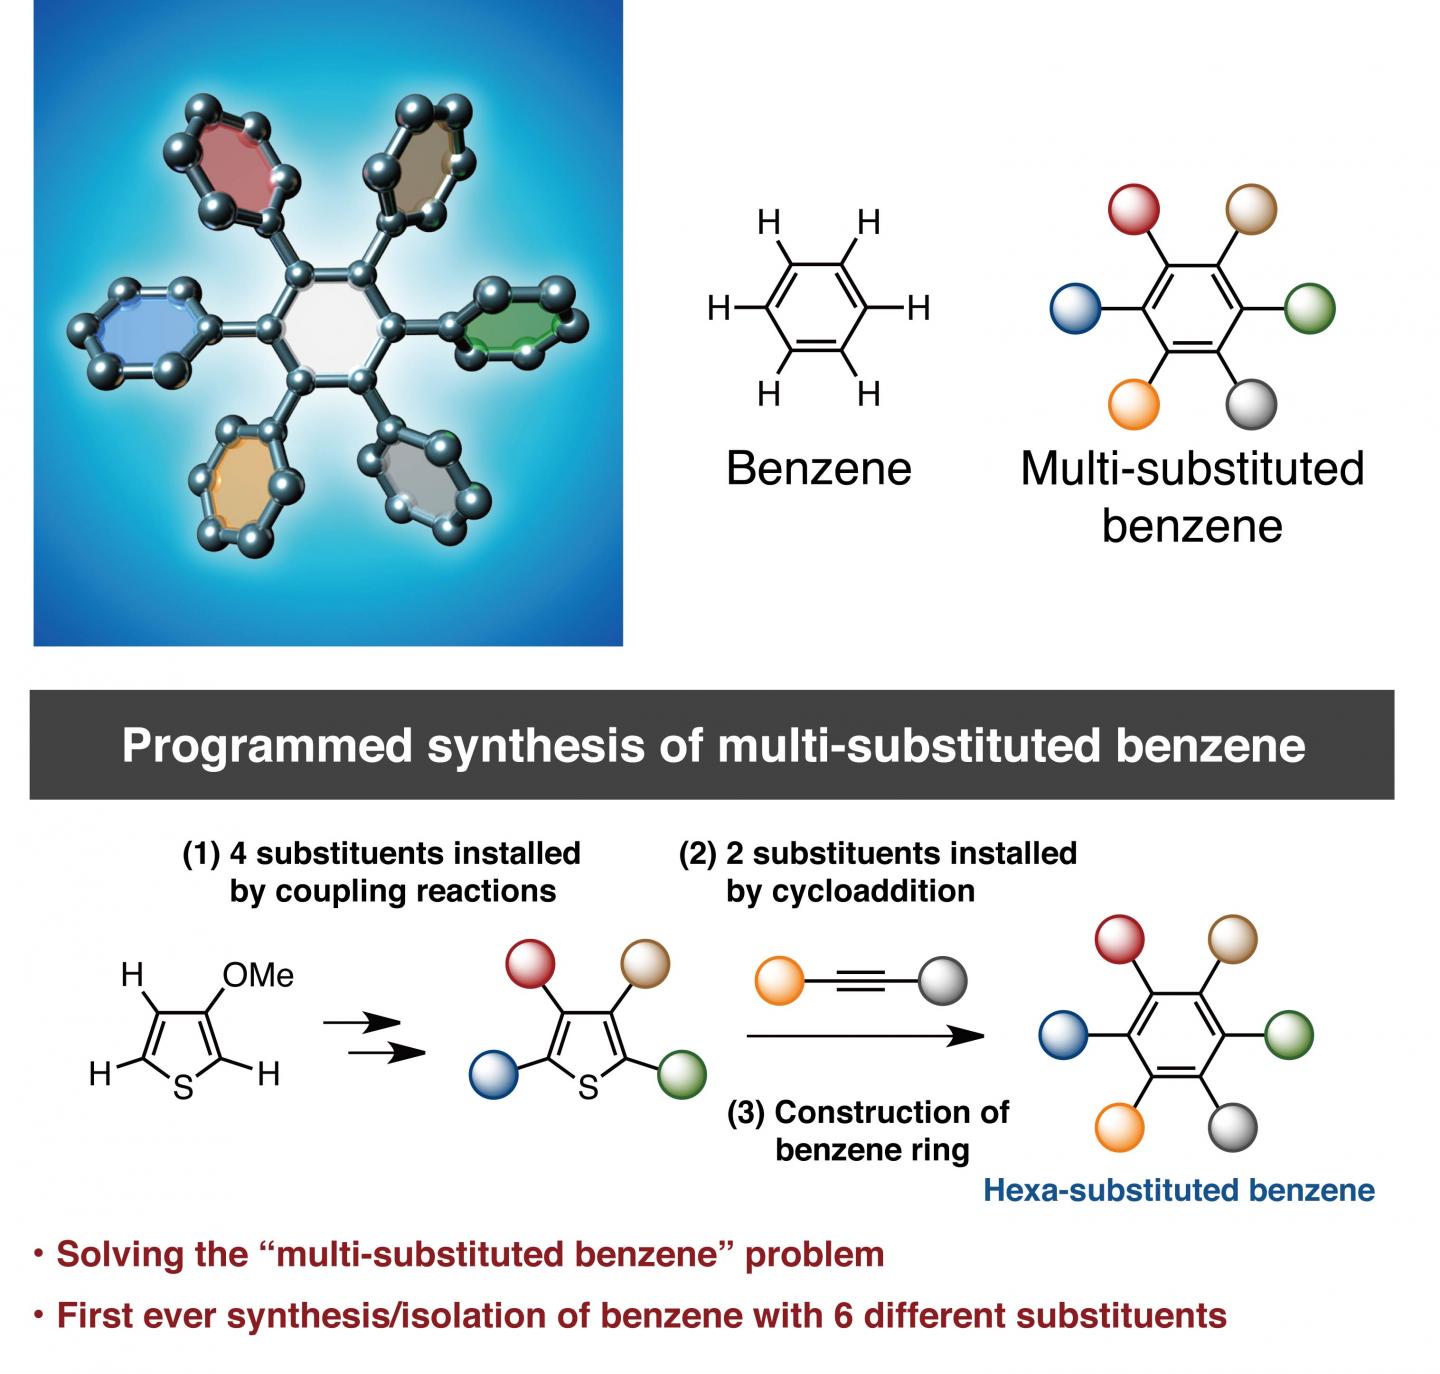 Programmed Synthesis of Multi-substituted Benzenes